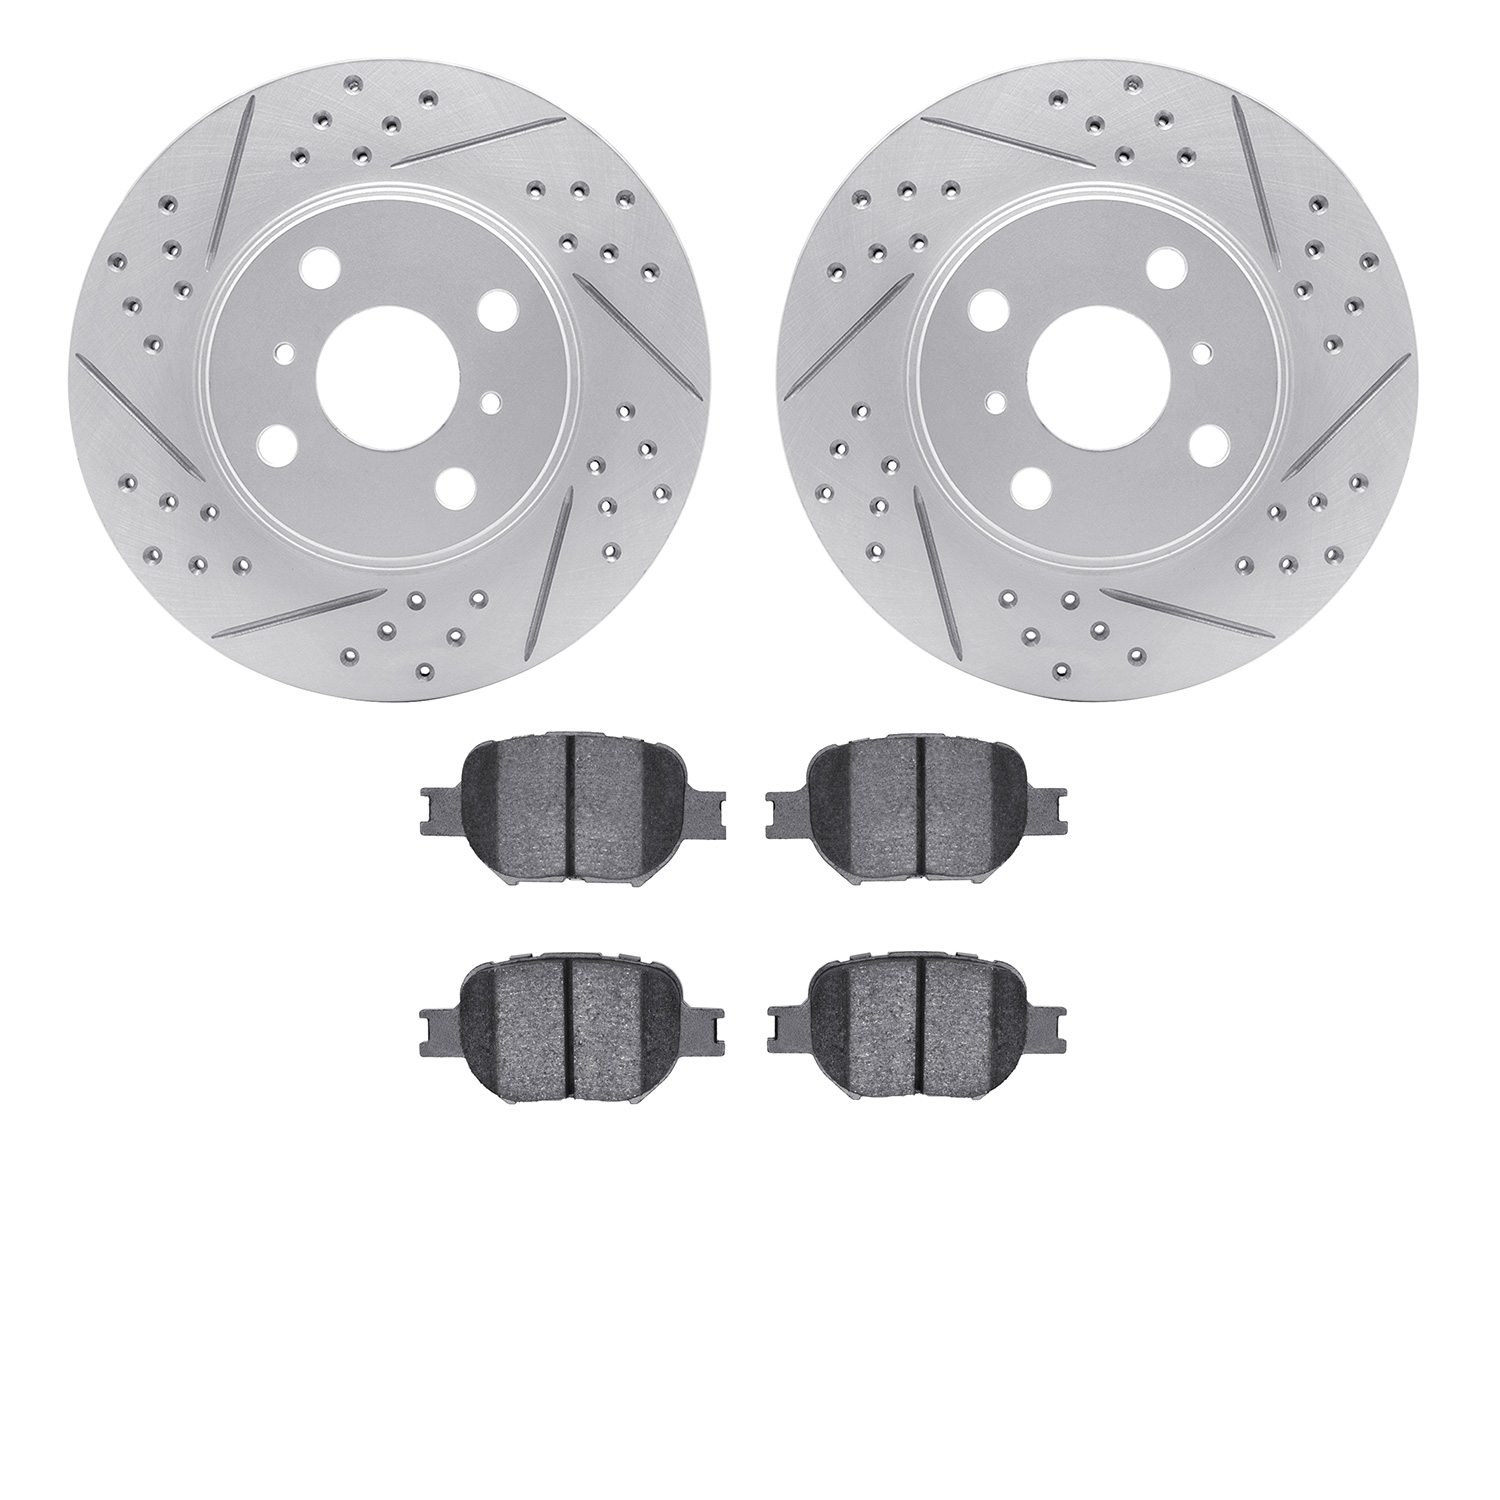 2502-91004 Geoperformance Drilled/Slotted Rotors w/5000 Advanced Brake Pads Kit, 2004-2006 Lexus/Toyota/Scion, Position: Front